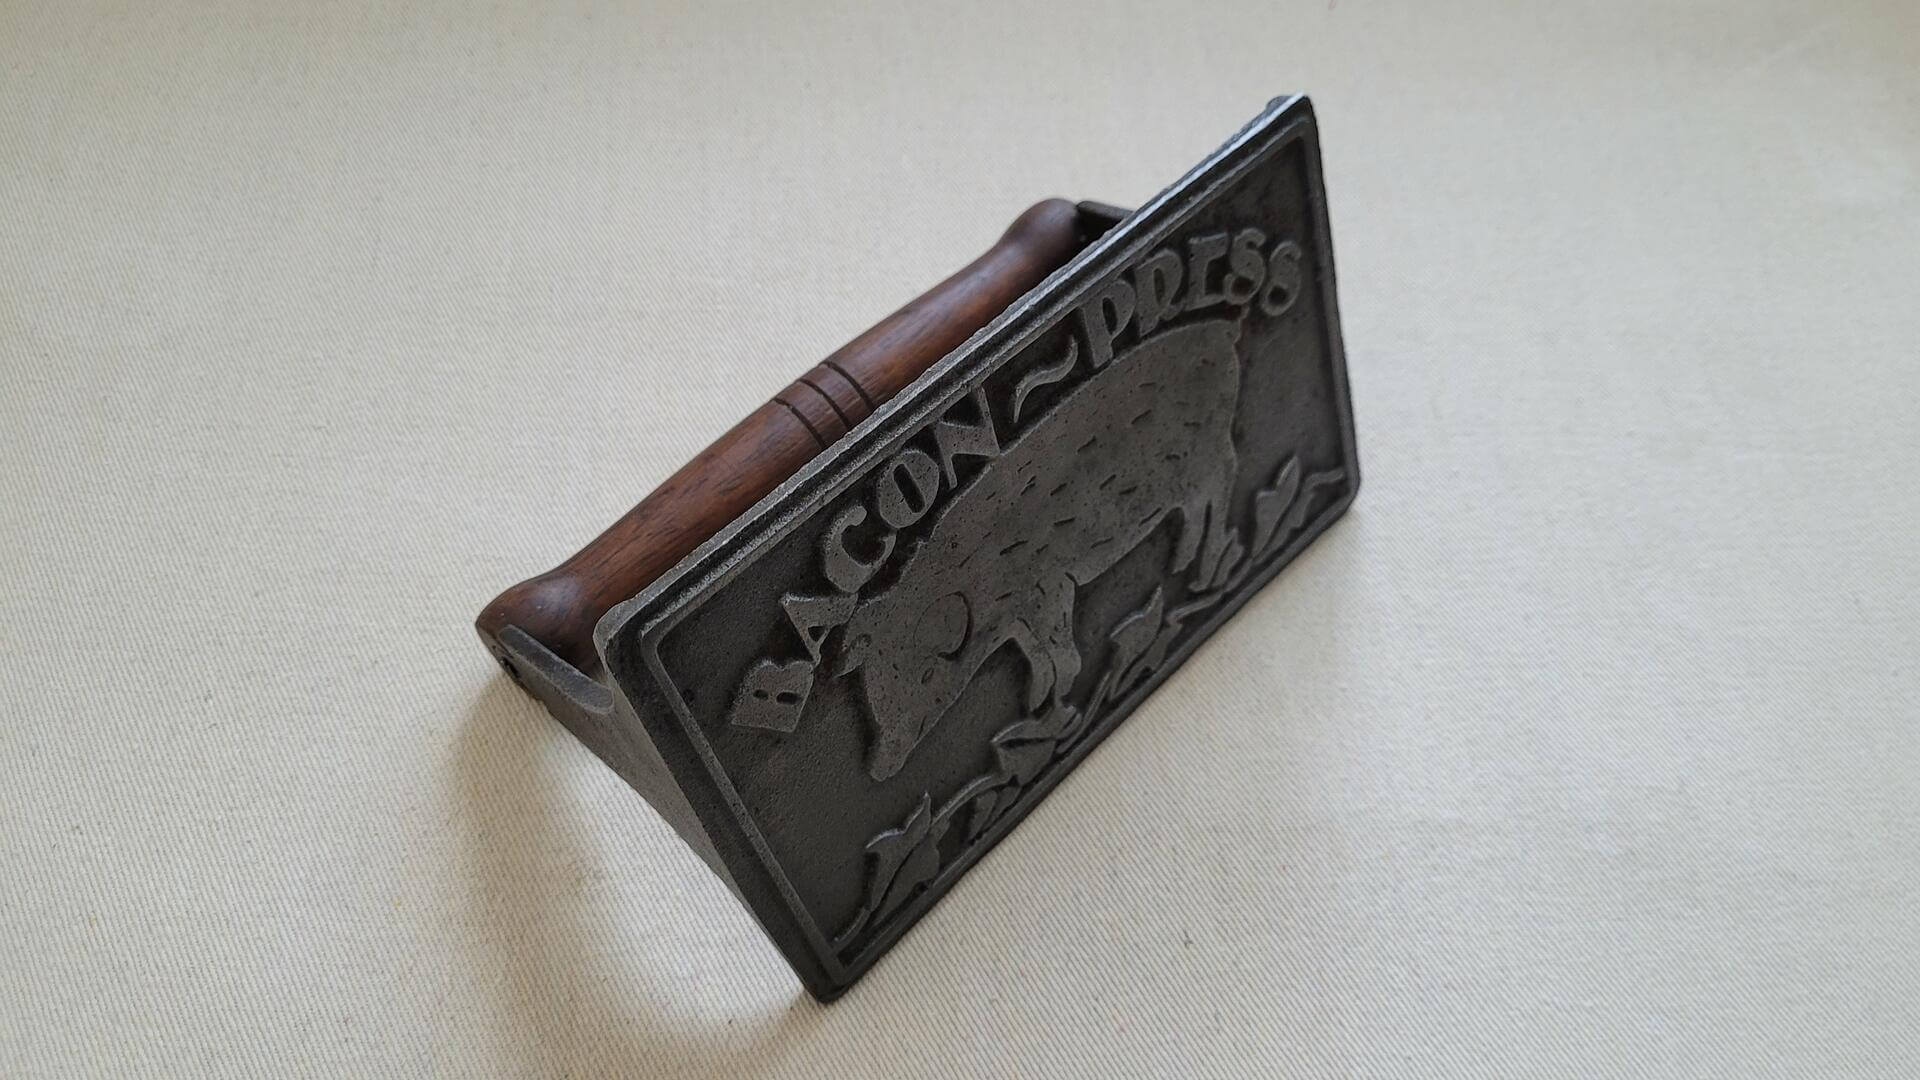 vintage cast iron bacon press with wooden handle 4.5"x7" inches. Collectible rustic farmhouse kitchen tools featuring pig and vine design on the plate underside.